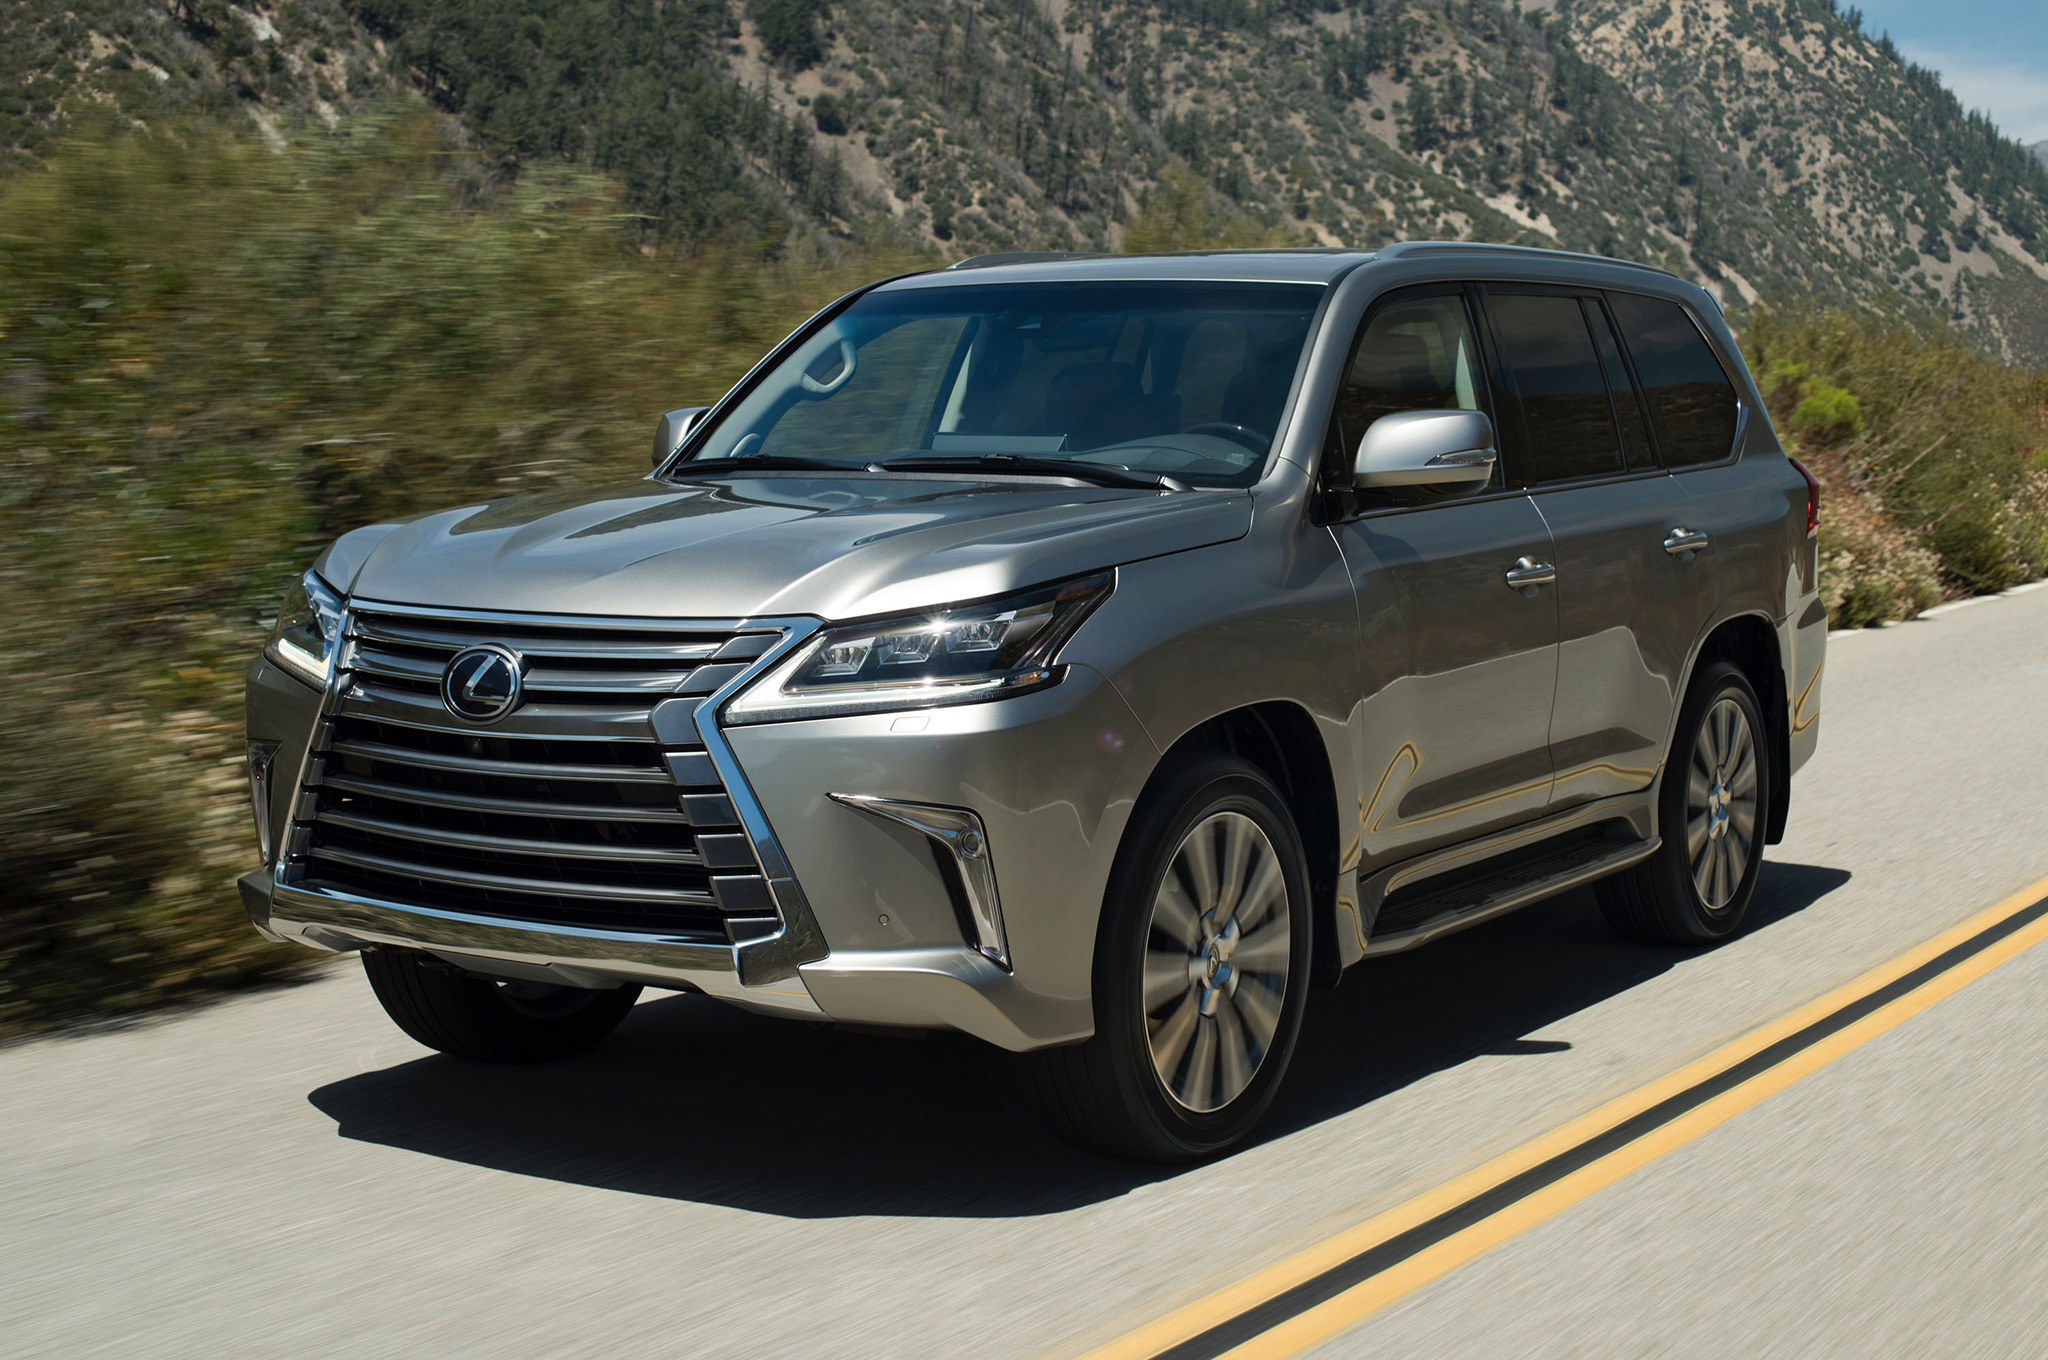 Lexus LX570, LX450d: All you need to know